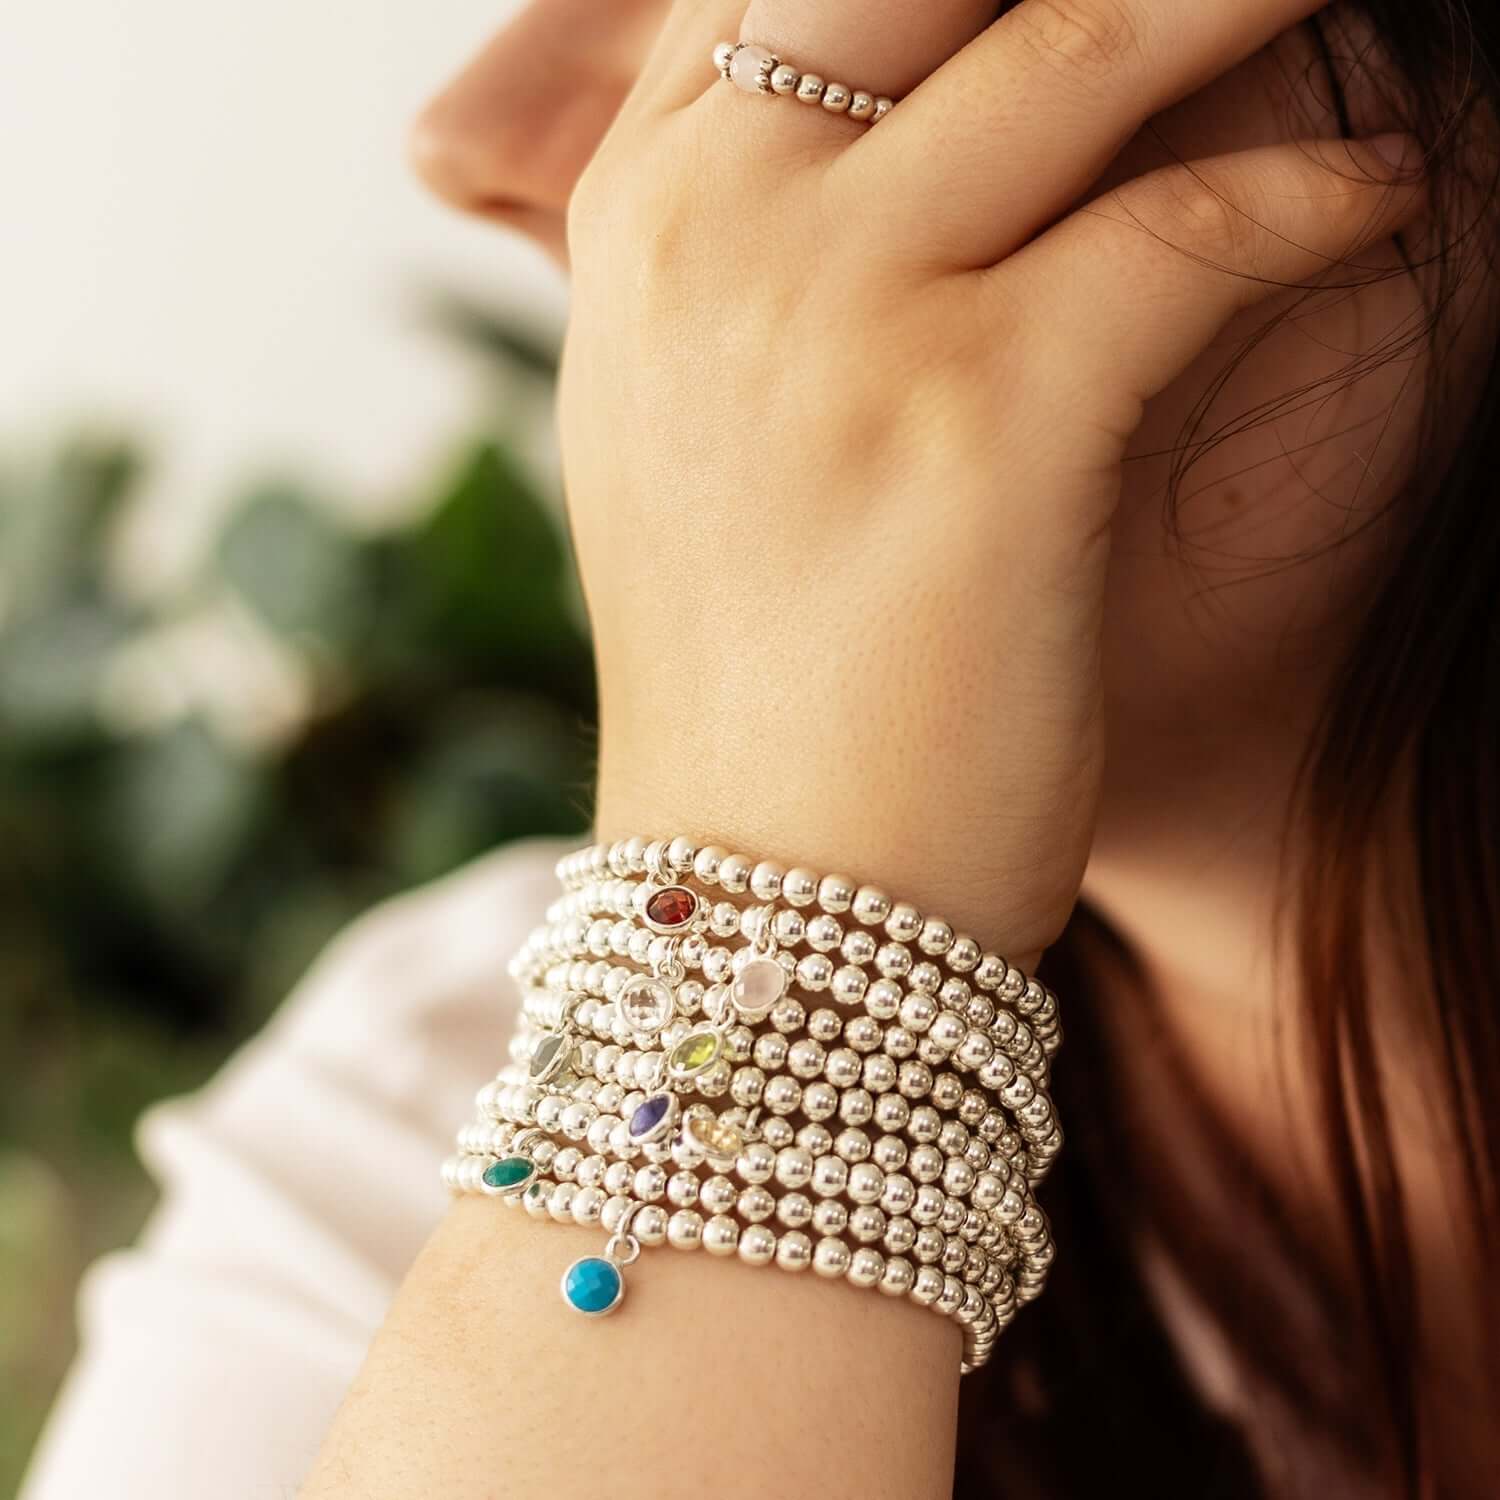  A person with long hair rests their hand against their face, showcasing a collection of sterling silver beaded bracelets of different sizes, each adorned with colorful gemstone charms. Additionally, a matching silver beaded ring graces their finger.